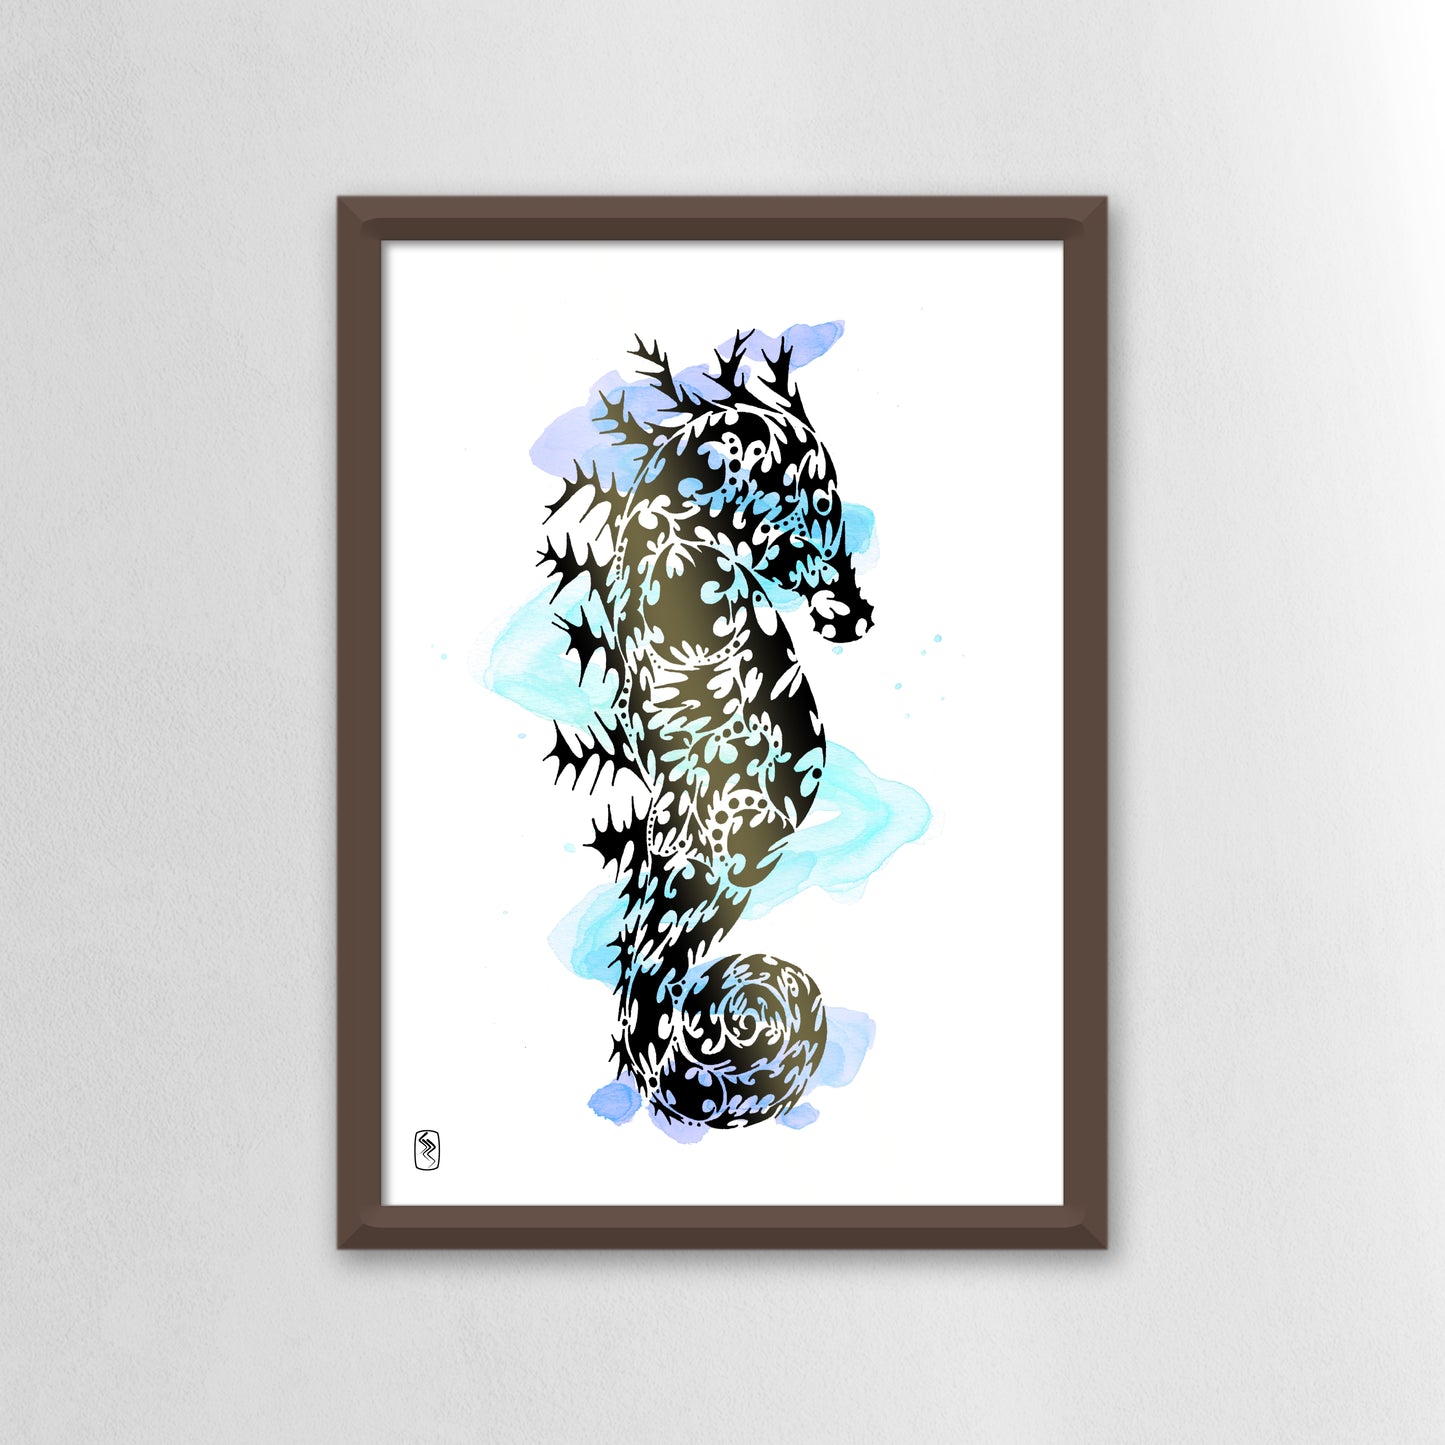 Tranquility Seahorse Print - A5 / A4